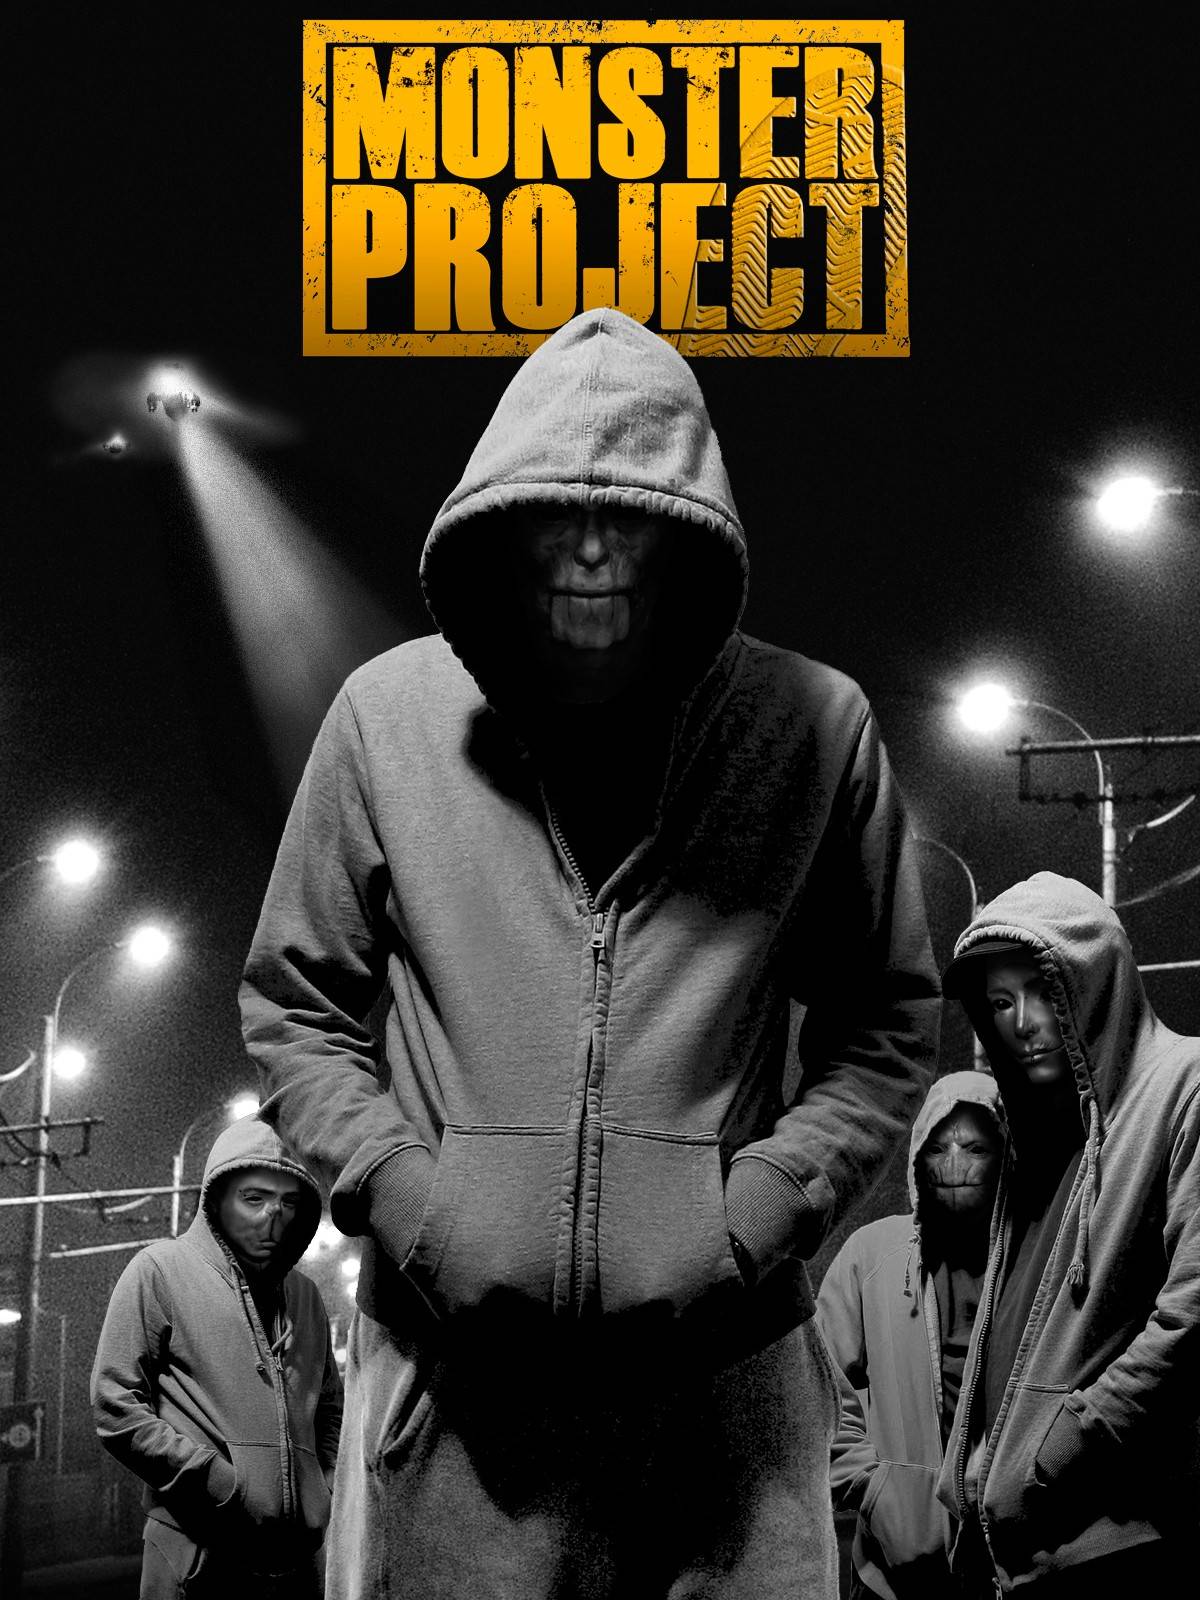 MONSTER PROJECT Poster